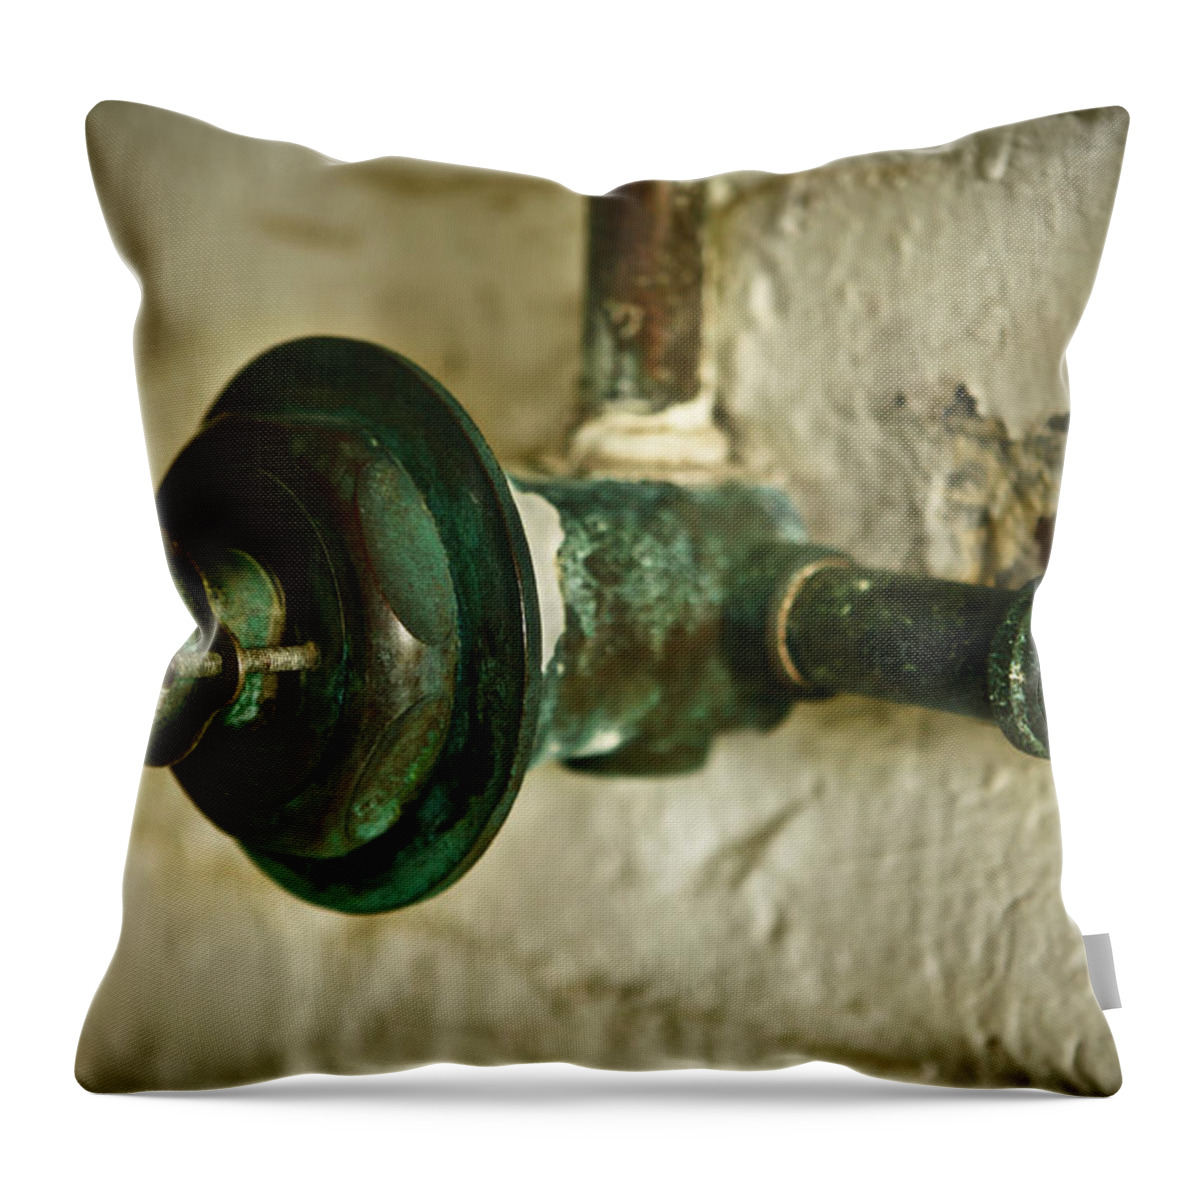 Old Throw Pillow featuring the photograph Old Copper Pipes by Marilyn Hunt